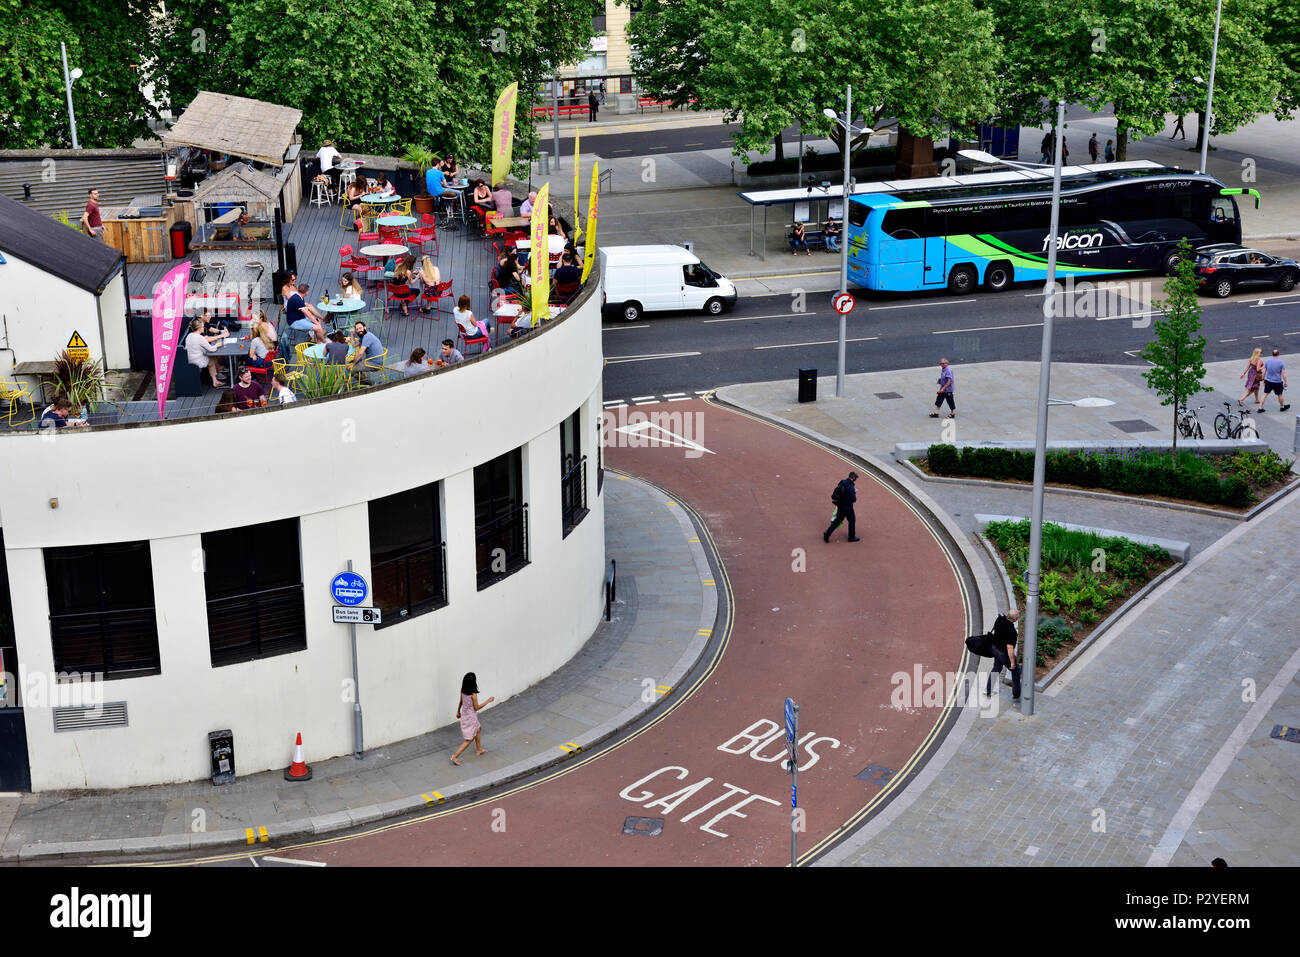 Bus lane in Bristol city centre and rooftop restaurant, bar, UK Stock Photo